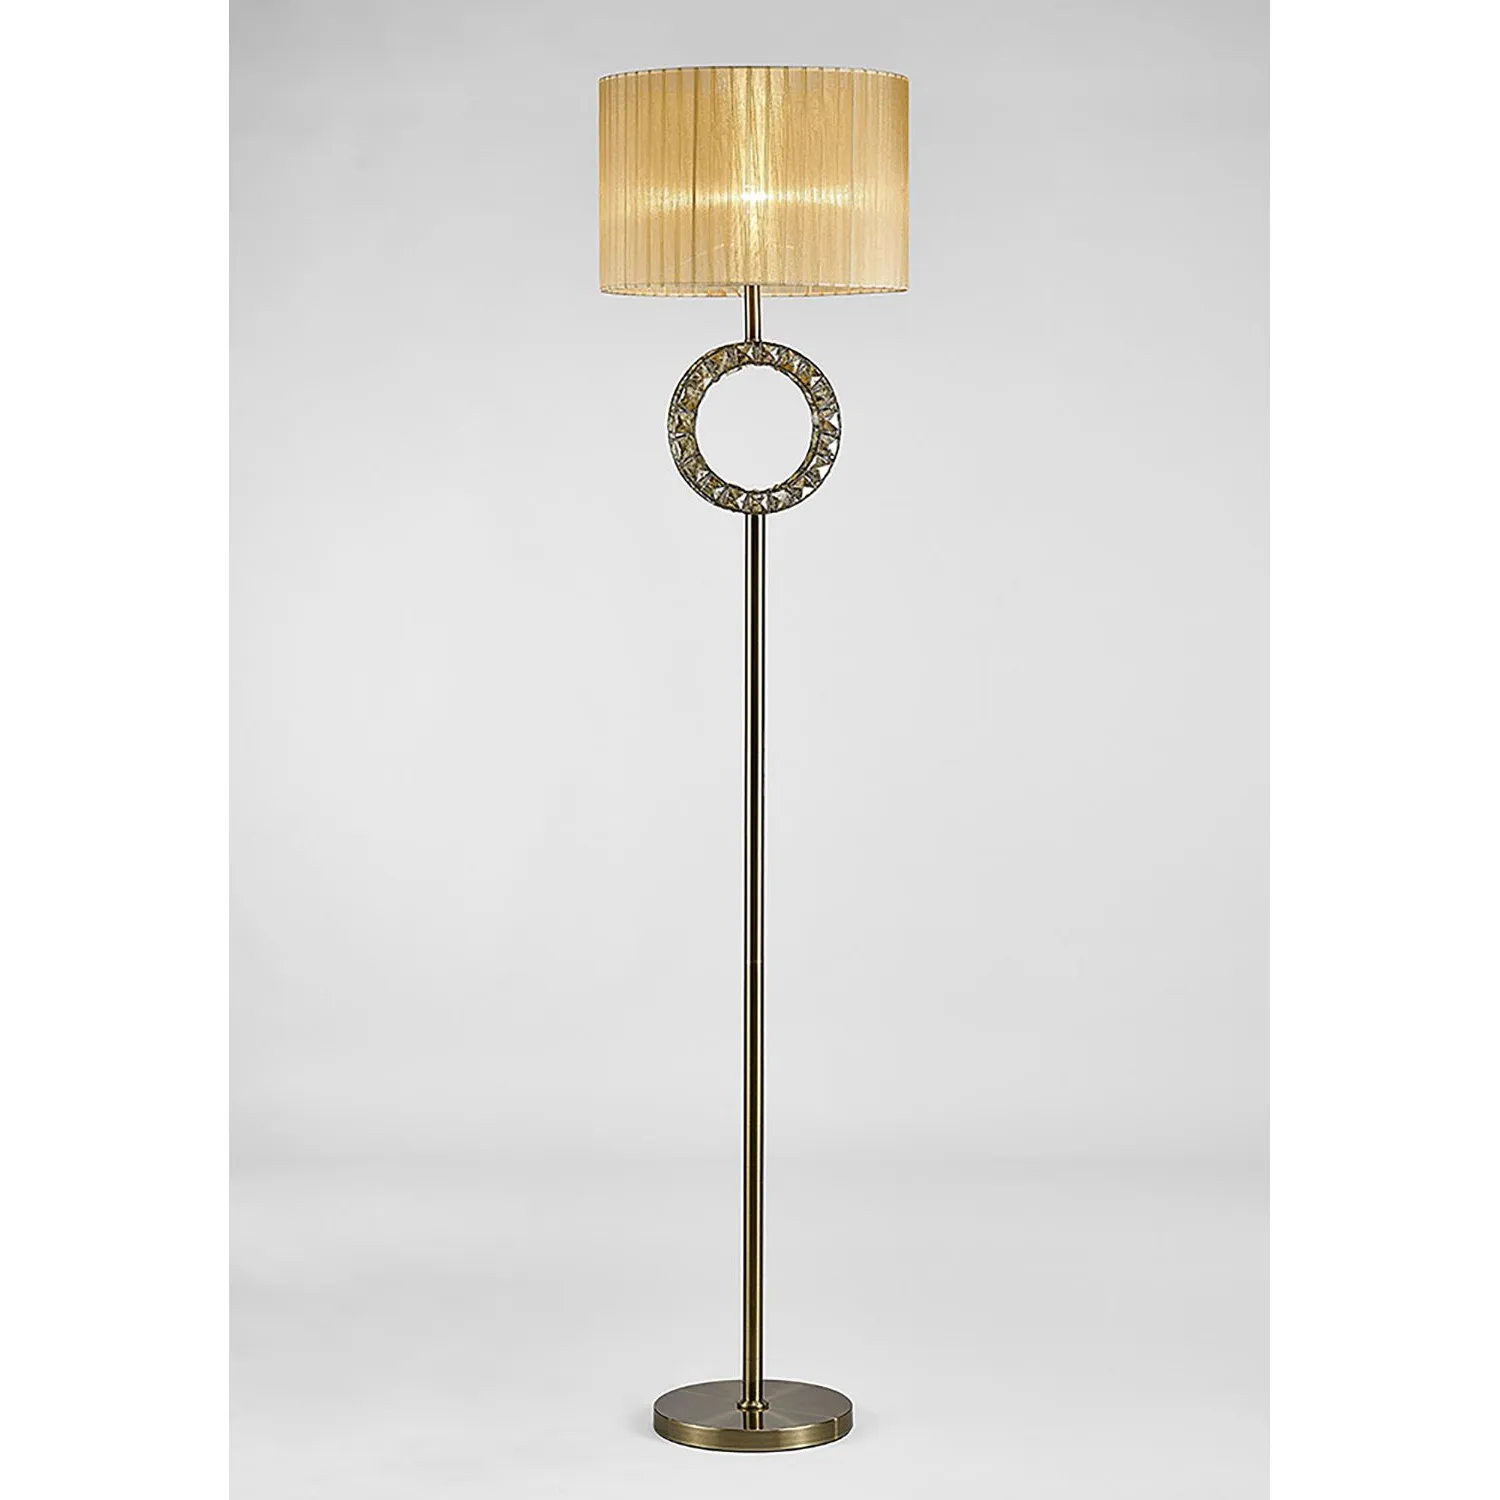 Florence Round Floor Lamp With Soft Bronze Shade 1 Light E27 Antique Brass Crystal Item Weight: 18.4kg